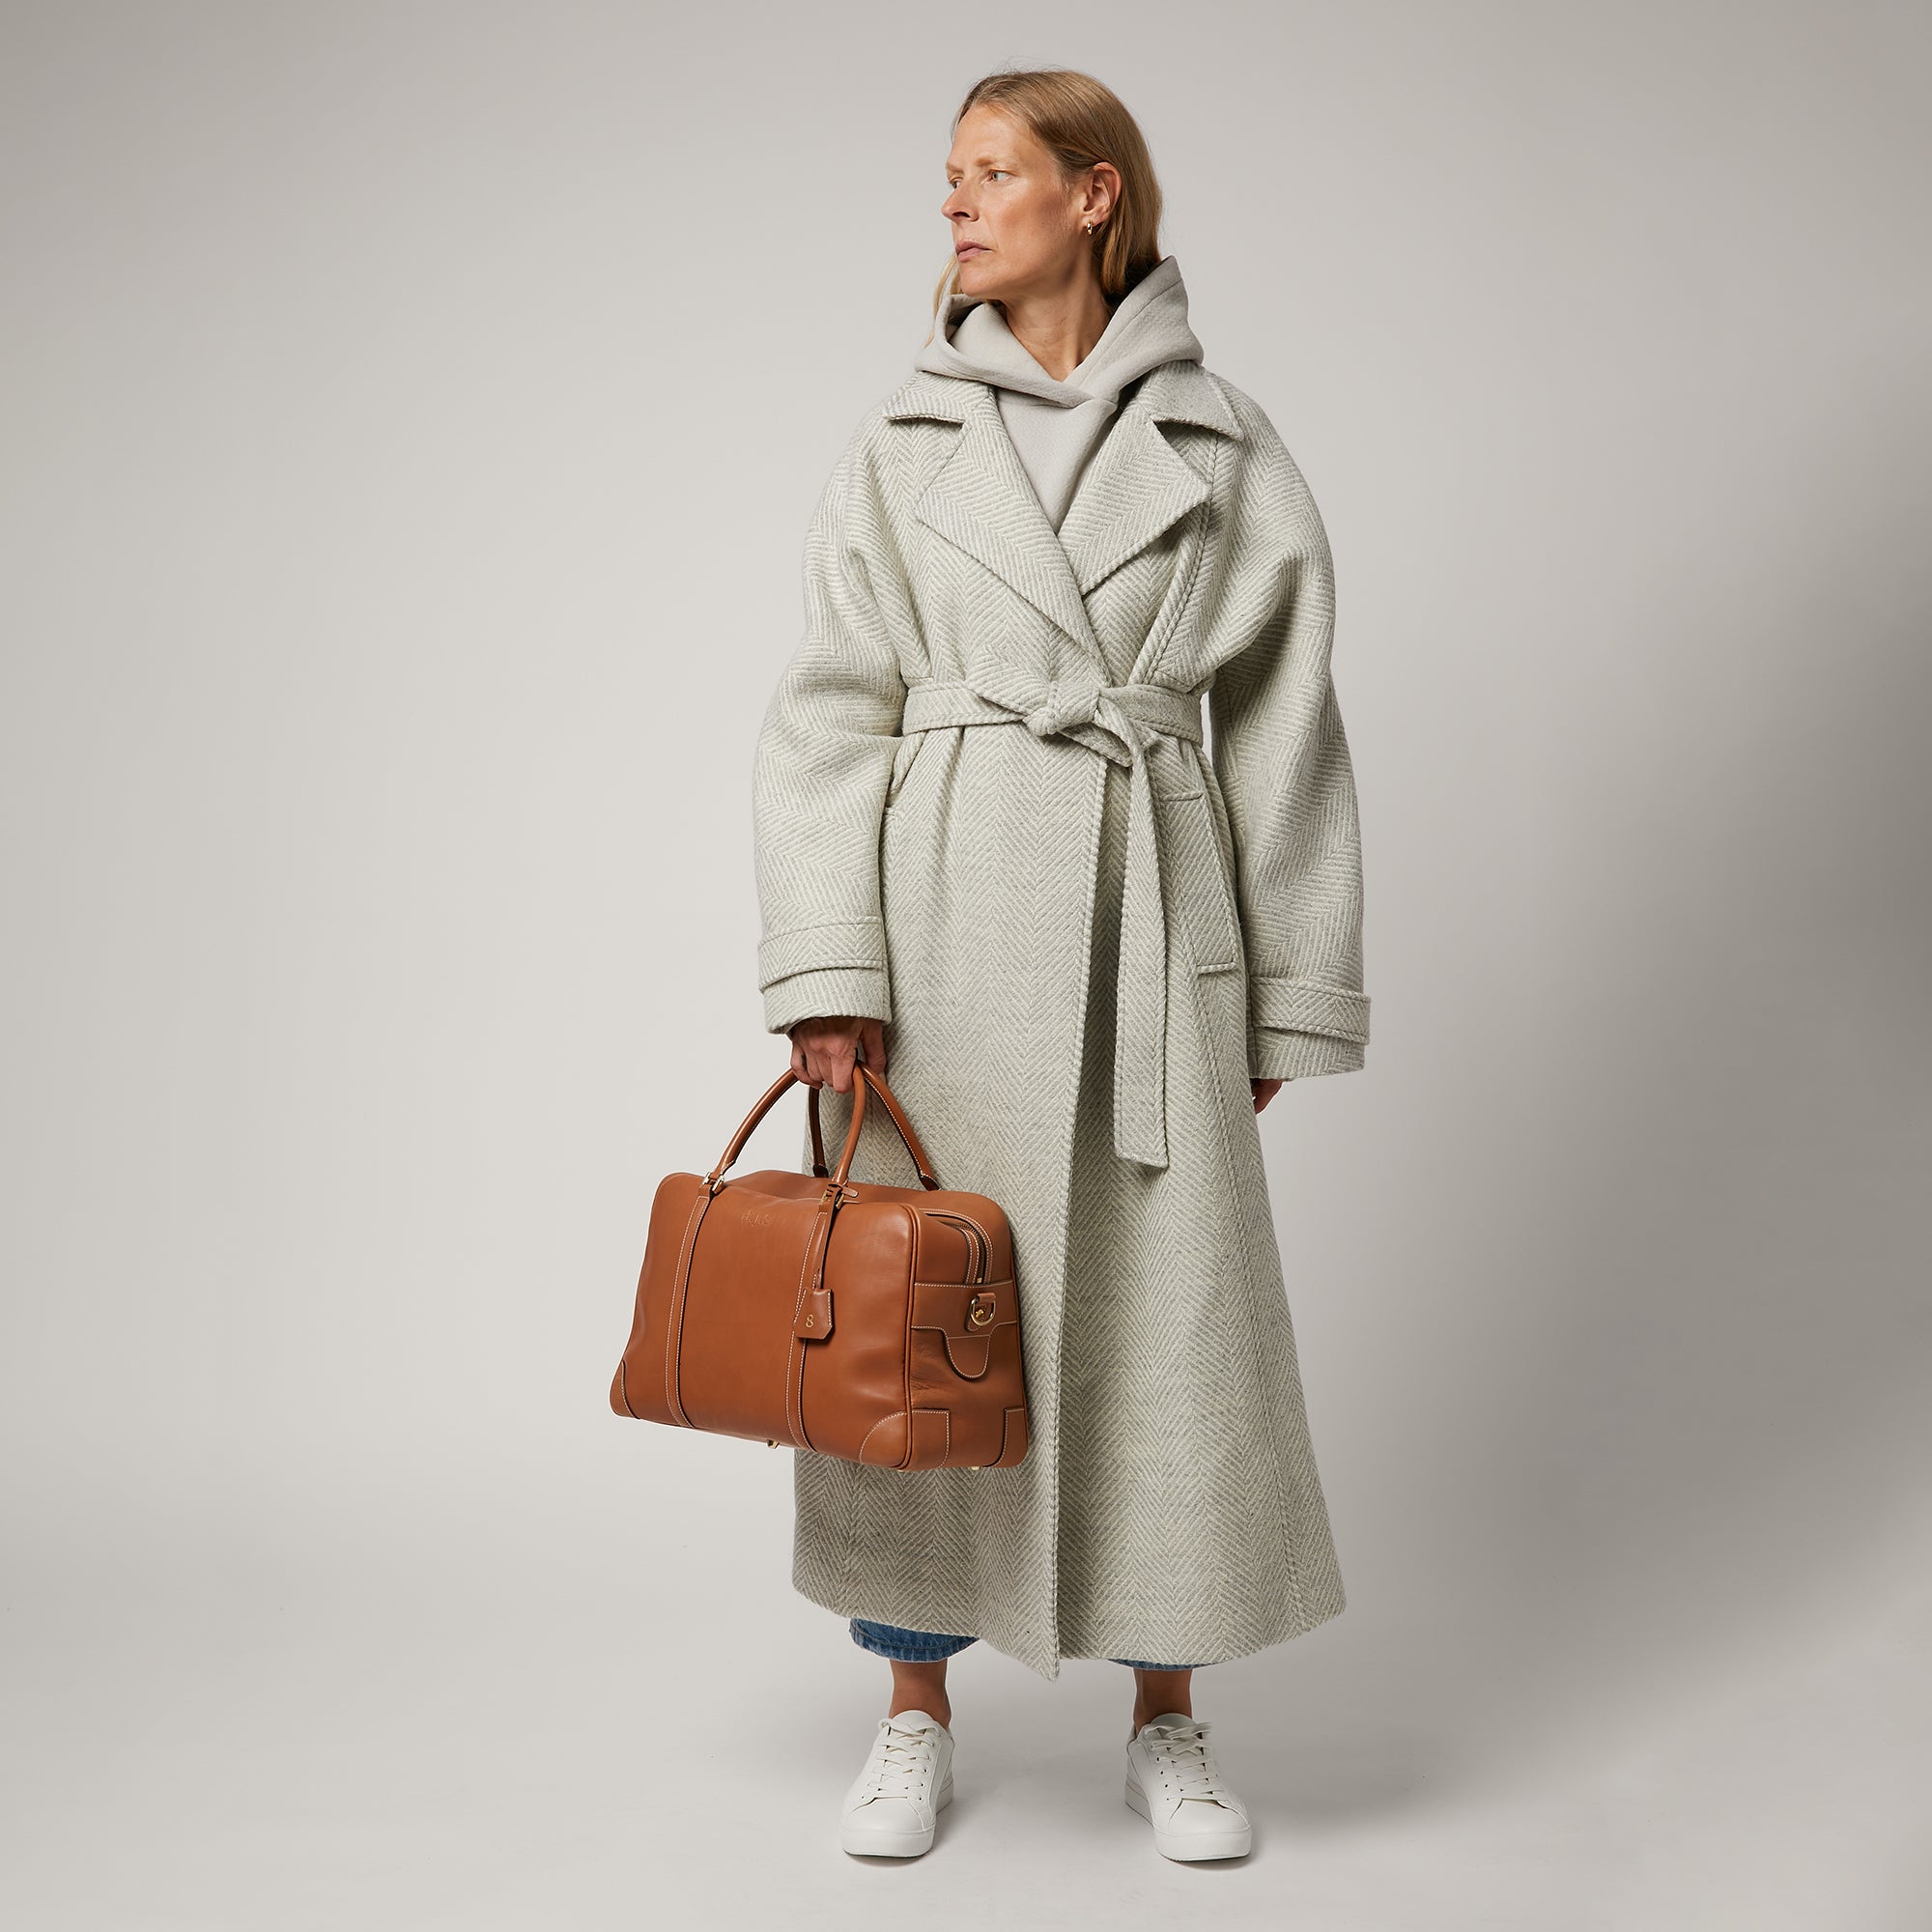 Bespoke Latimer -

                  
                    Butter Leather in Tan -
                  

                  Anya Hindmarch US
